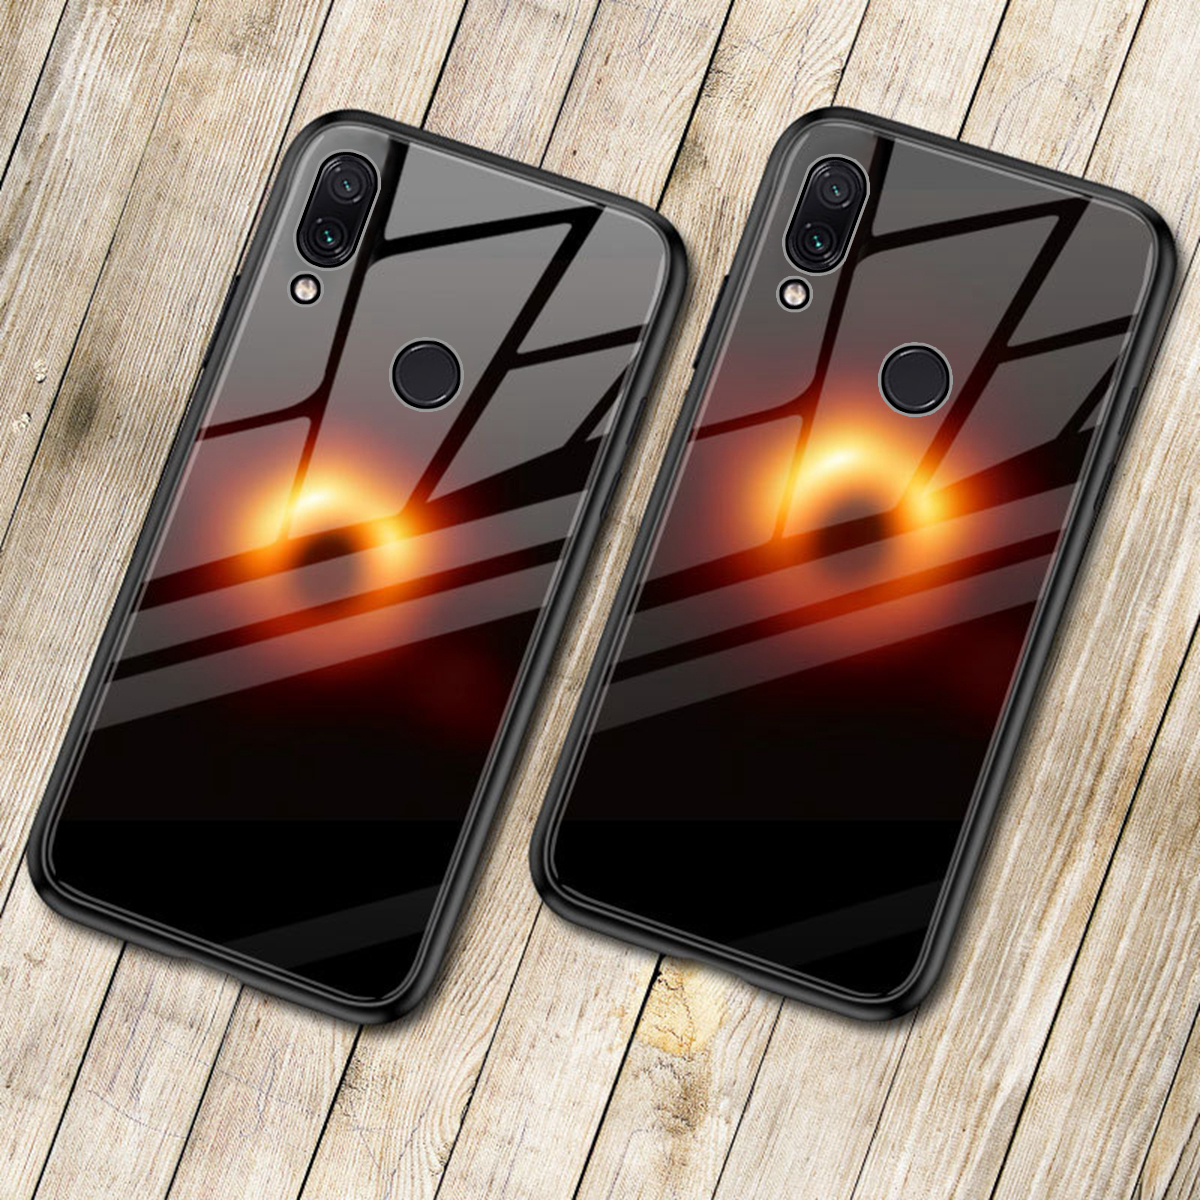 Bakeey-Black-Holes-Collapsar-Hard-Tempered-GlassSoft-TPU-Protective-Case-For-Huawei-Honor-8X-1460254-5